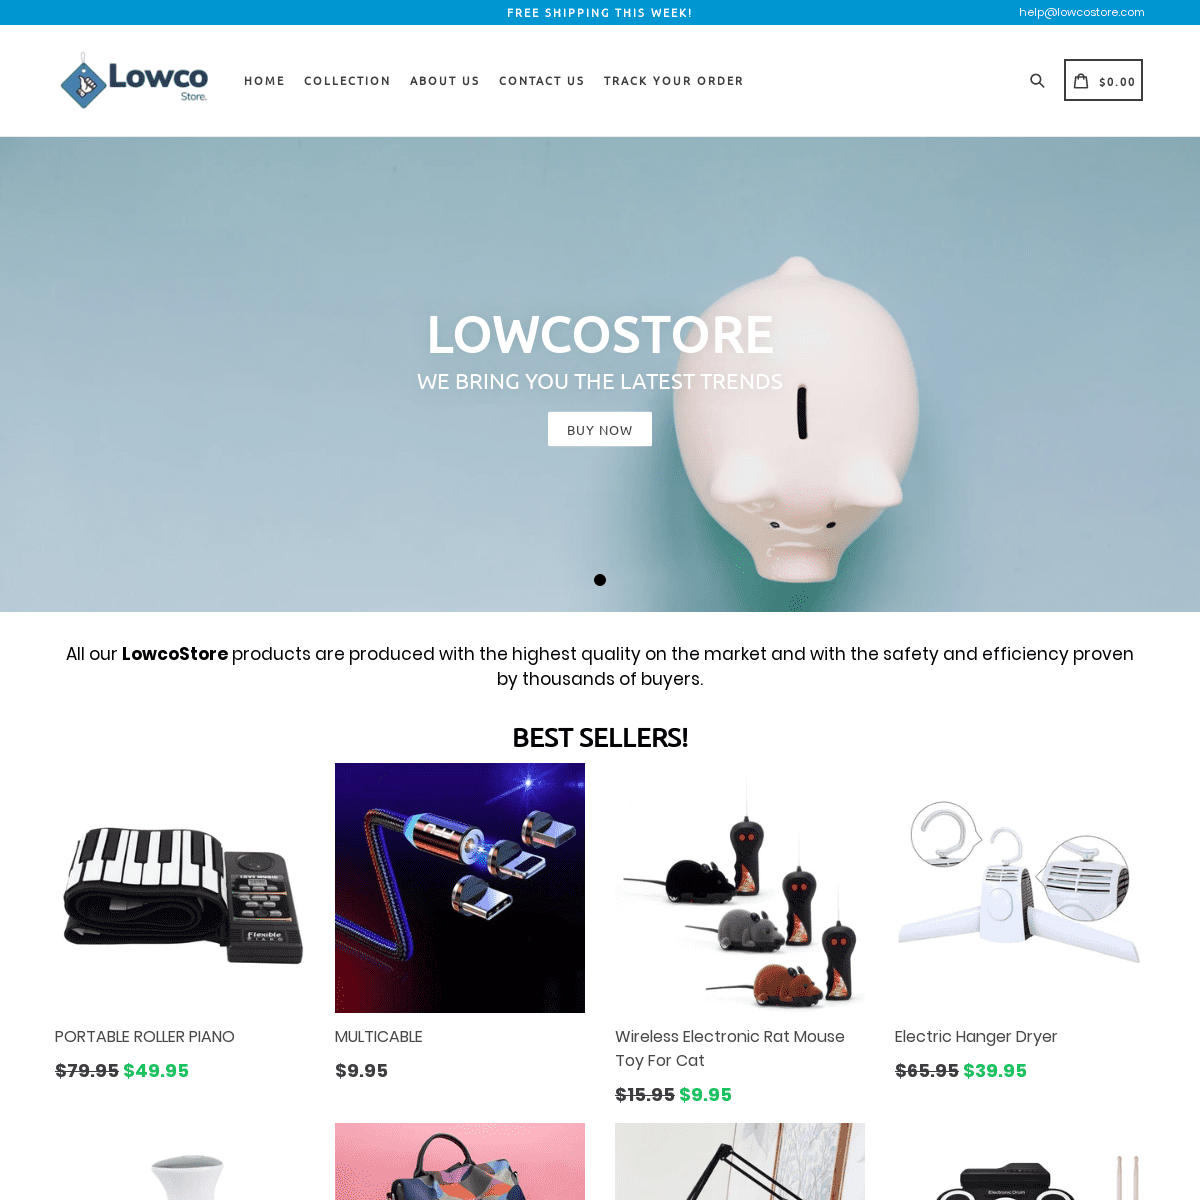 A complete backup of lowcostore.com